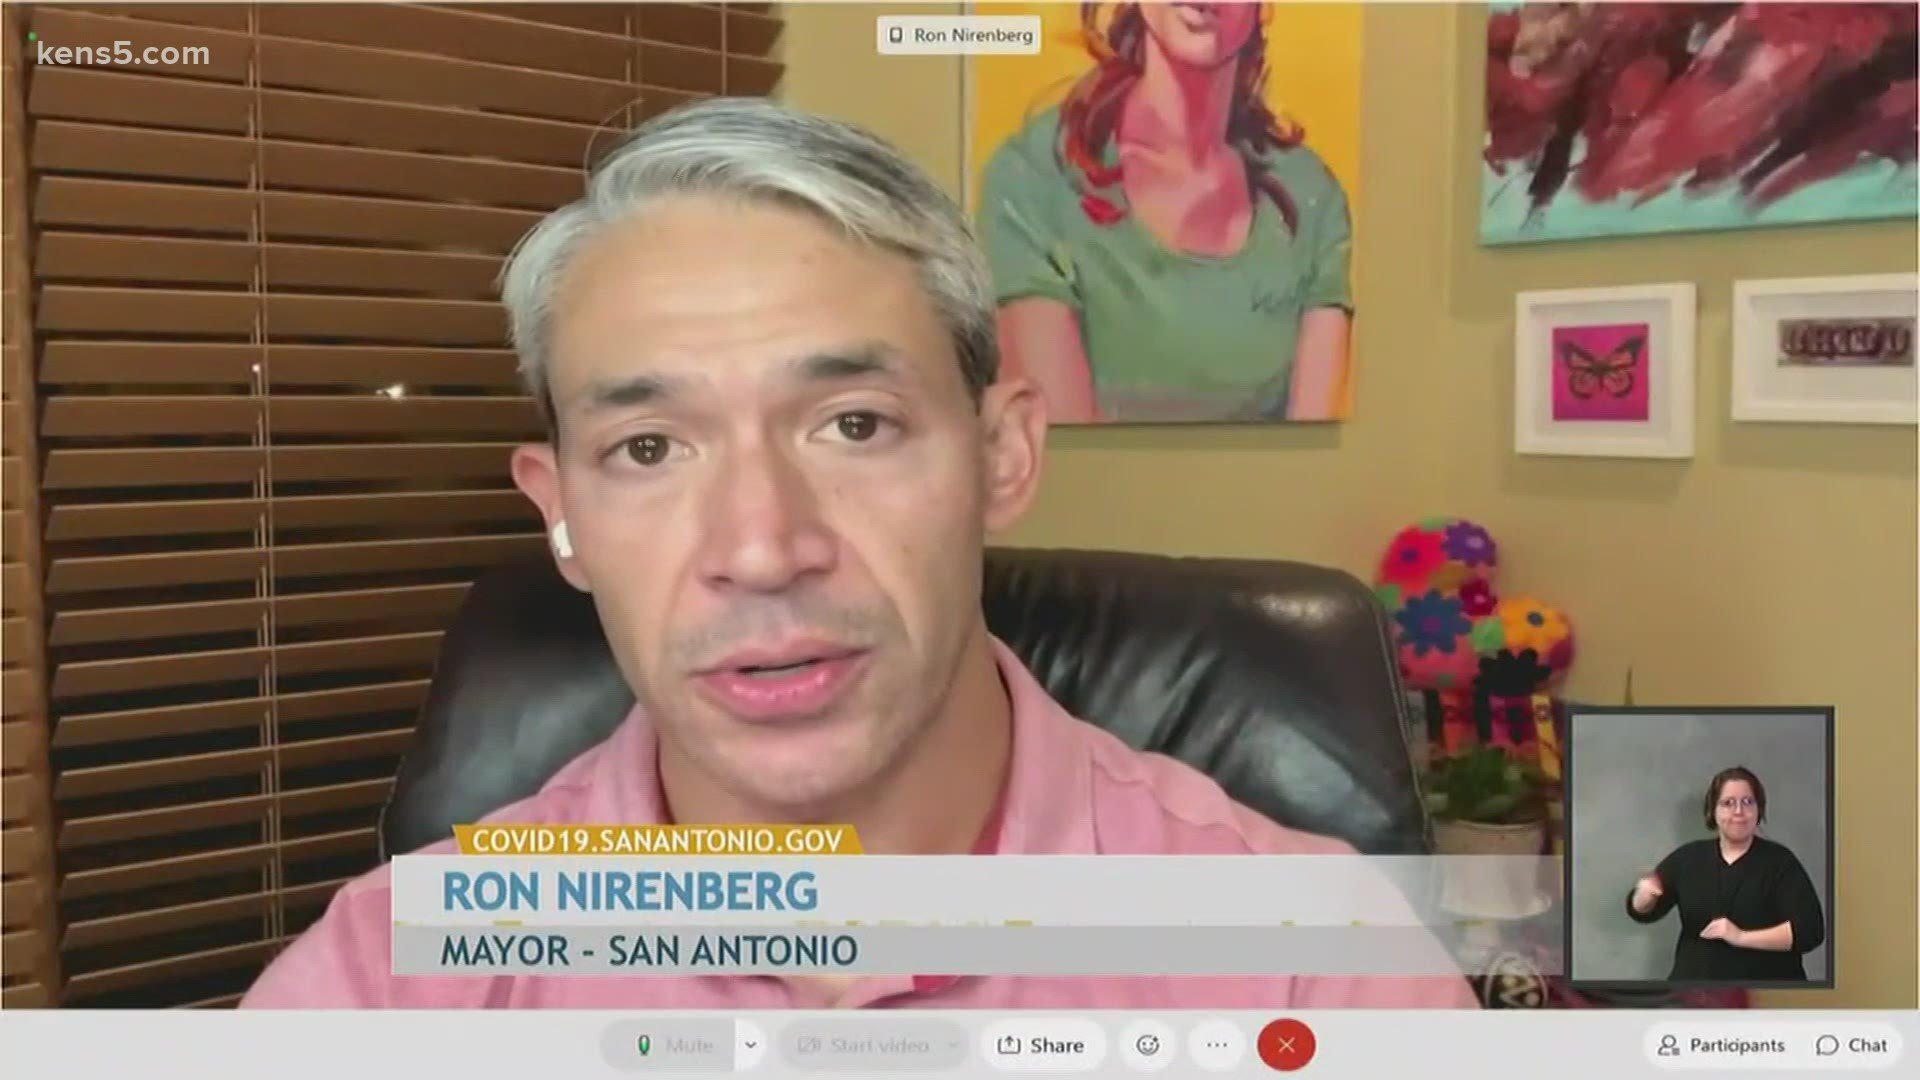 Mayor Nirenberg reported 366 new cases, bringing the total to 70,894. He also reported 3 new deaths, bringing the county's death toll to 1,307.